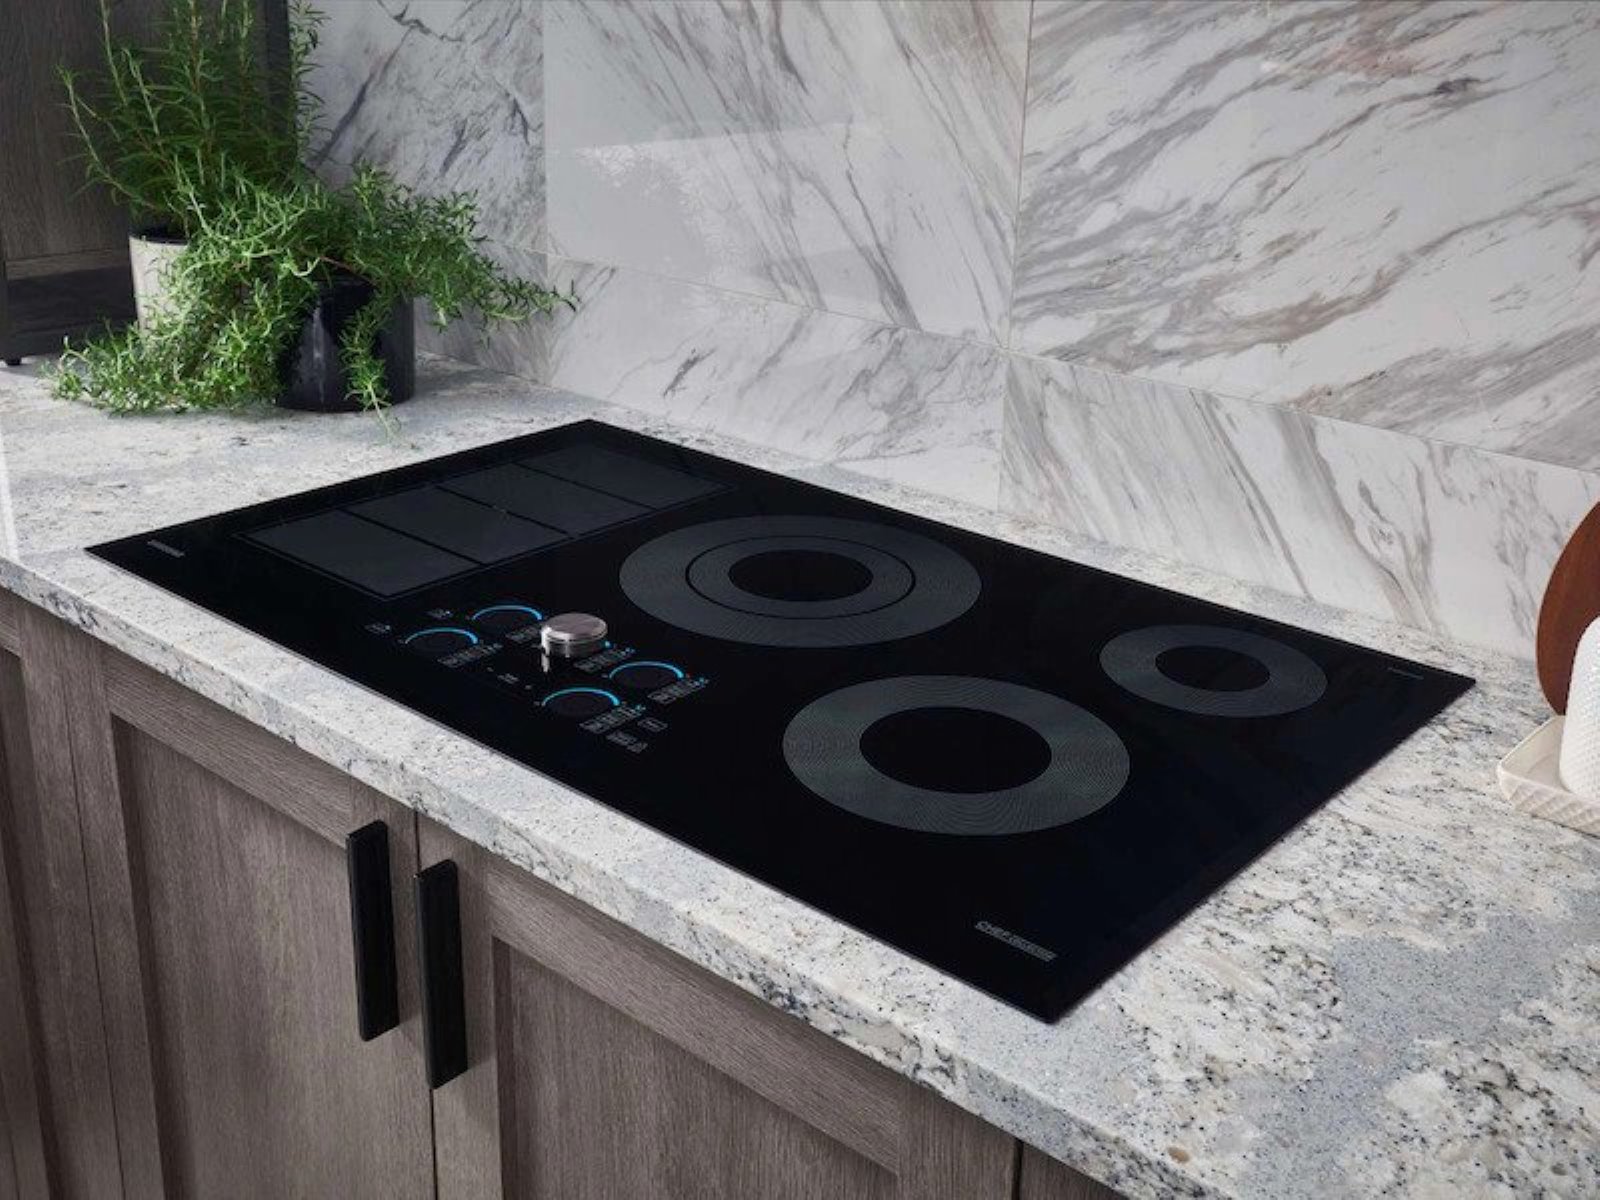 How To Fix The Error Code E86 For Samsung Cooktop